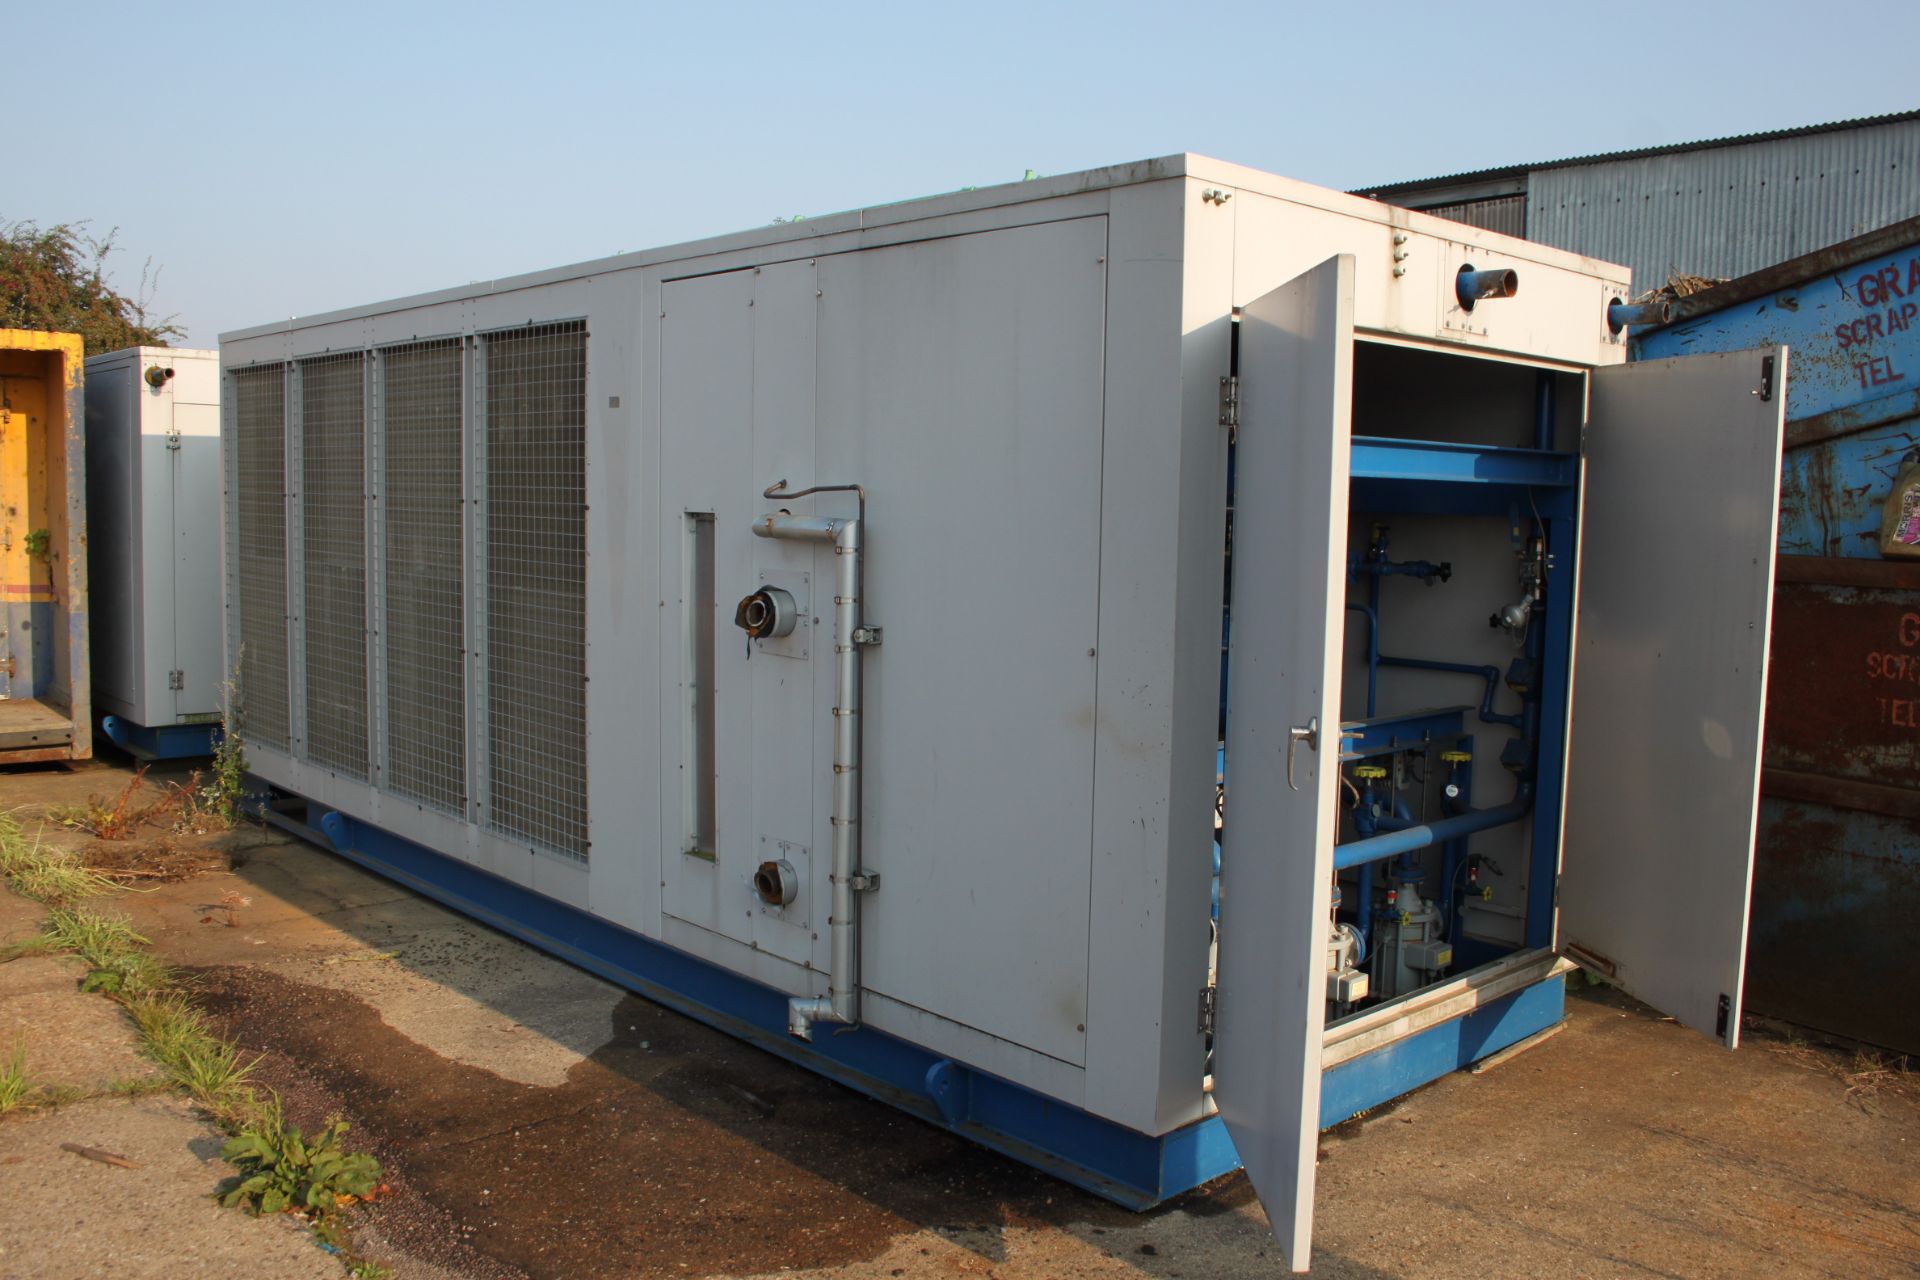 STAR REFRIGERATION CONTAINERISED 3PHS REFRIGERATION UNIT C/W TWIN COMPRESSORS, 4 INDEPENDENT